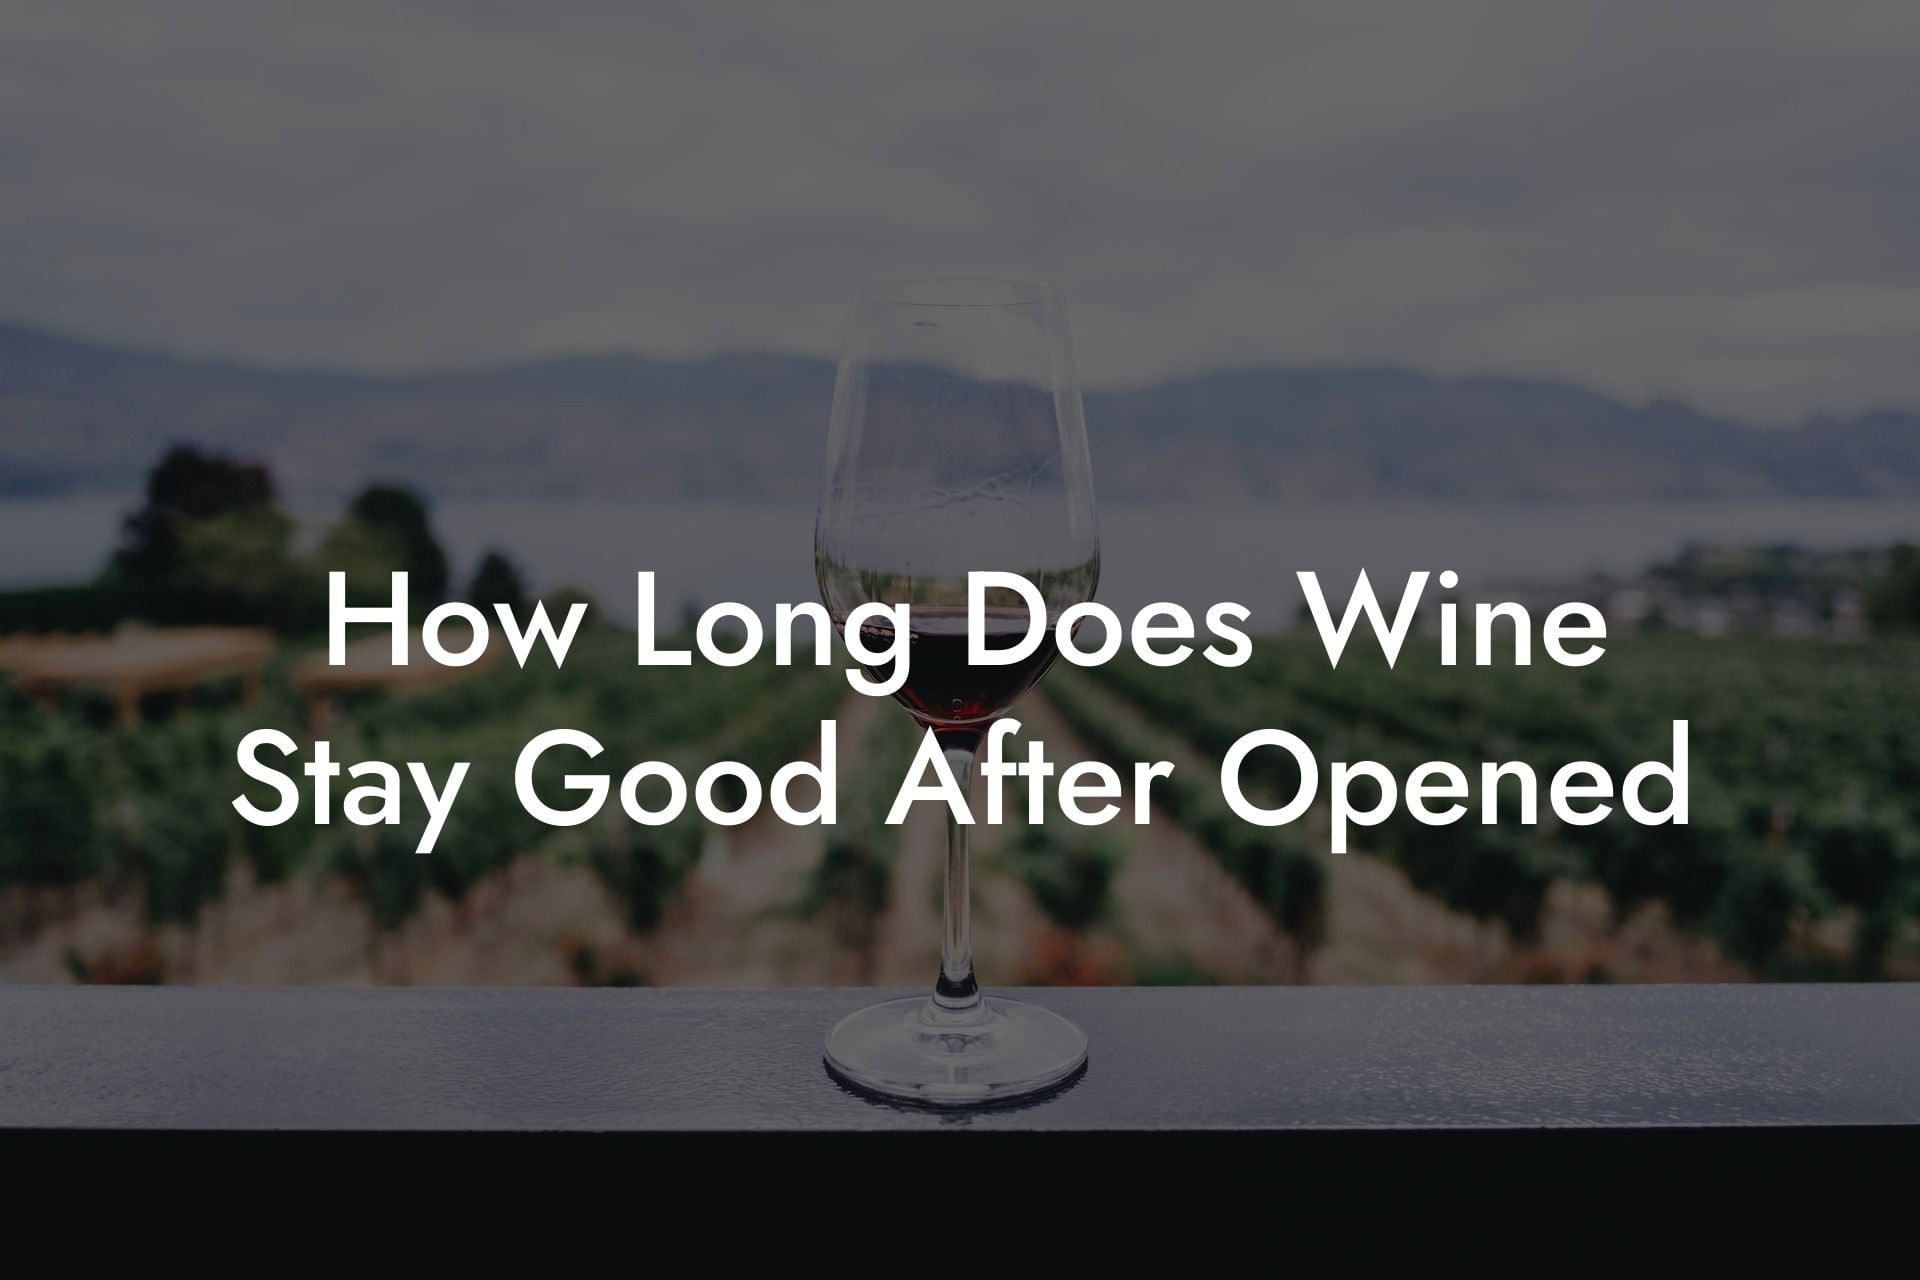 How Long Does Wine Stay Good After Opened